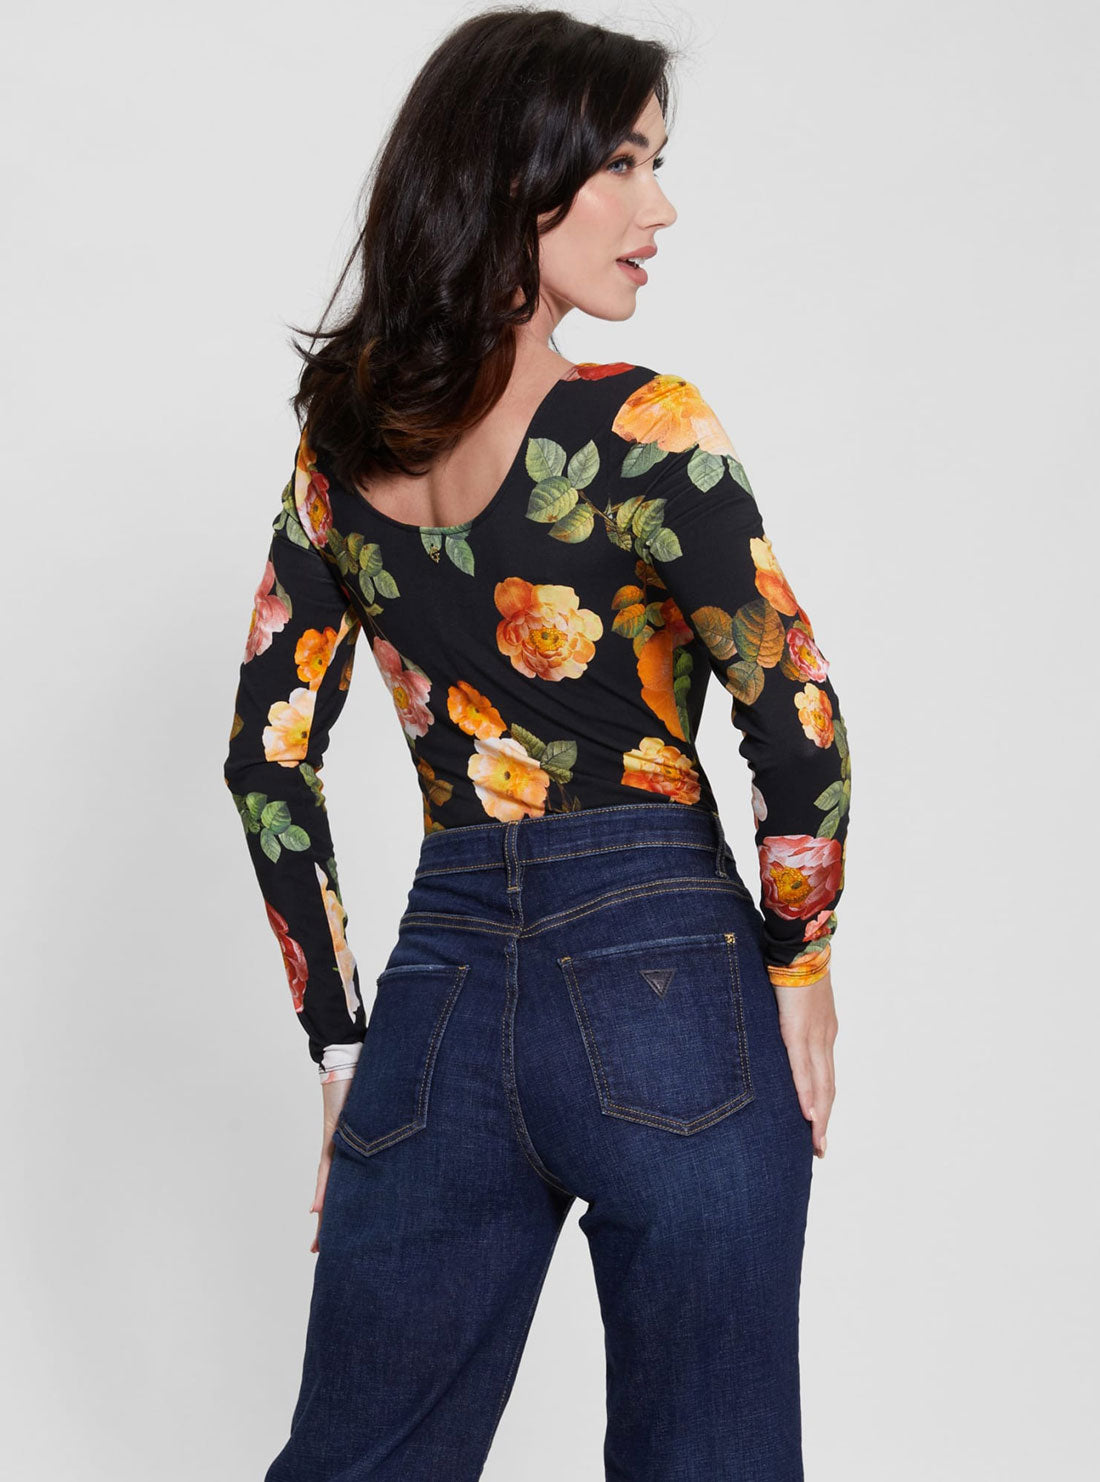 GUESS Black Floral Karla Henley Top back view